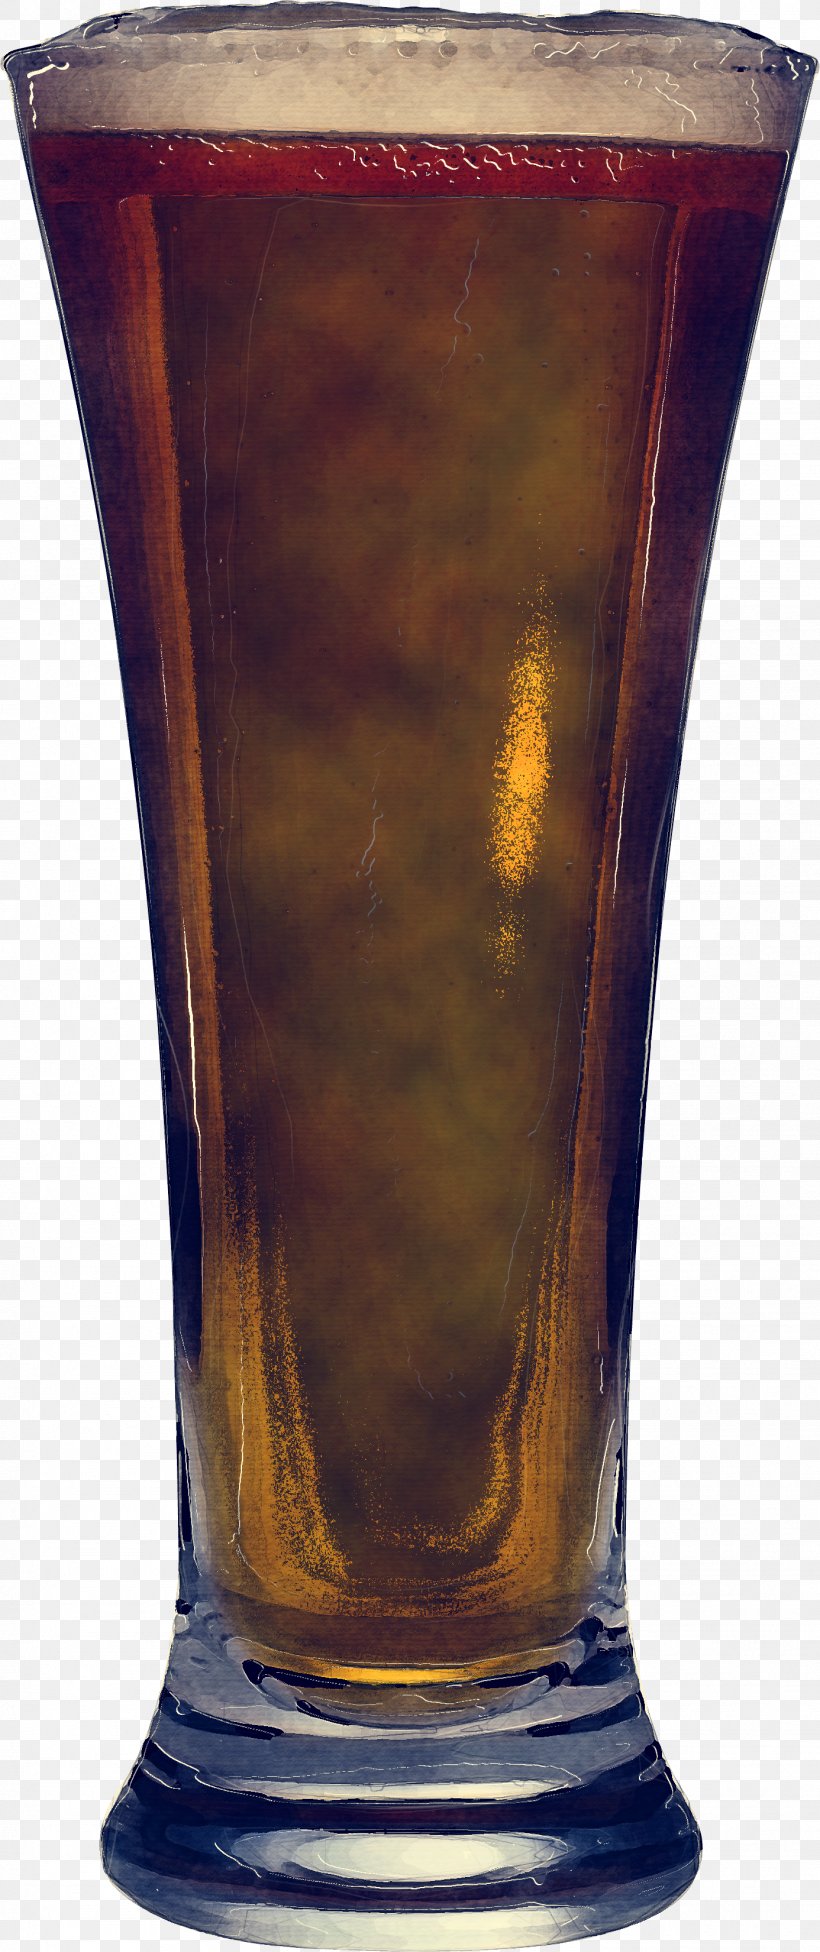 Pint Glass Beer Glass Pint Vase Drink, PNG, 1386x3301px, Pint Glass, Beer, Beer Glass, Caramel Color, Drink Download Free